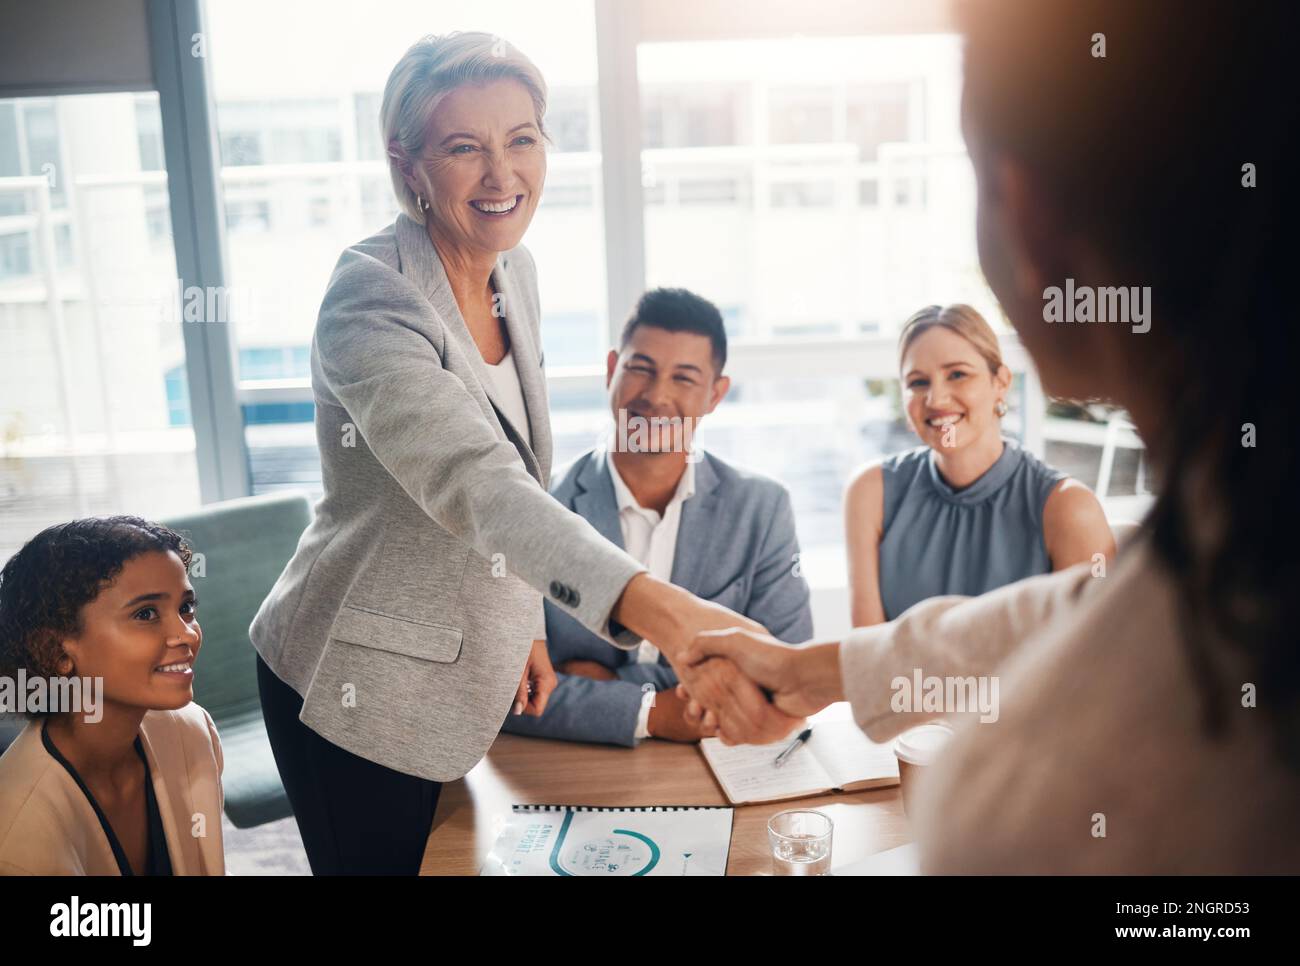 Ceo meeting, success or business people shaking hands after a contract agreement for working together. Diversity, company and happy management welcome Stock Photo